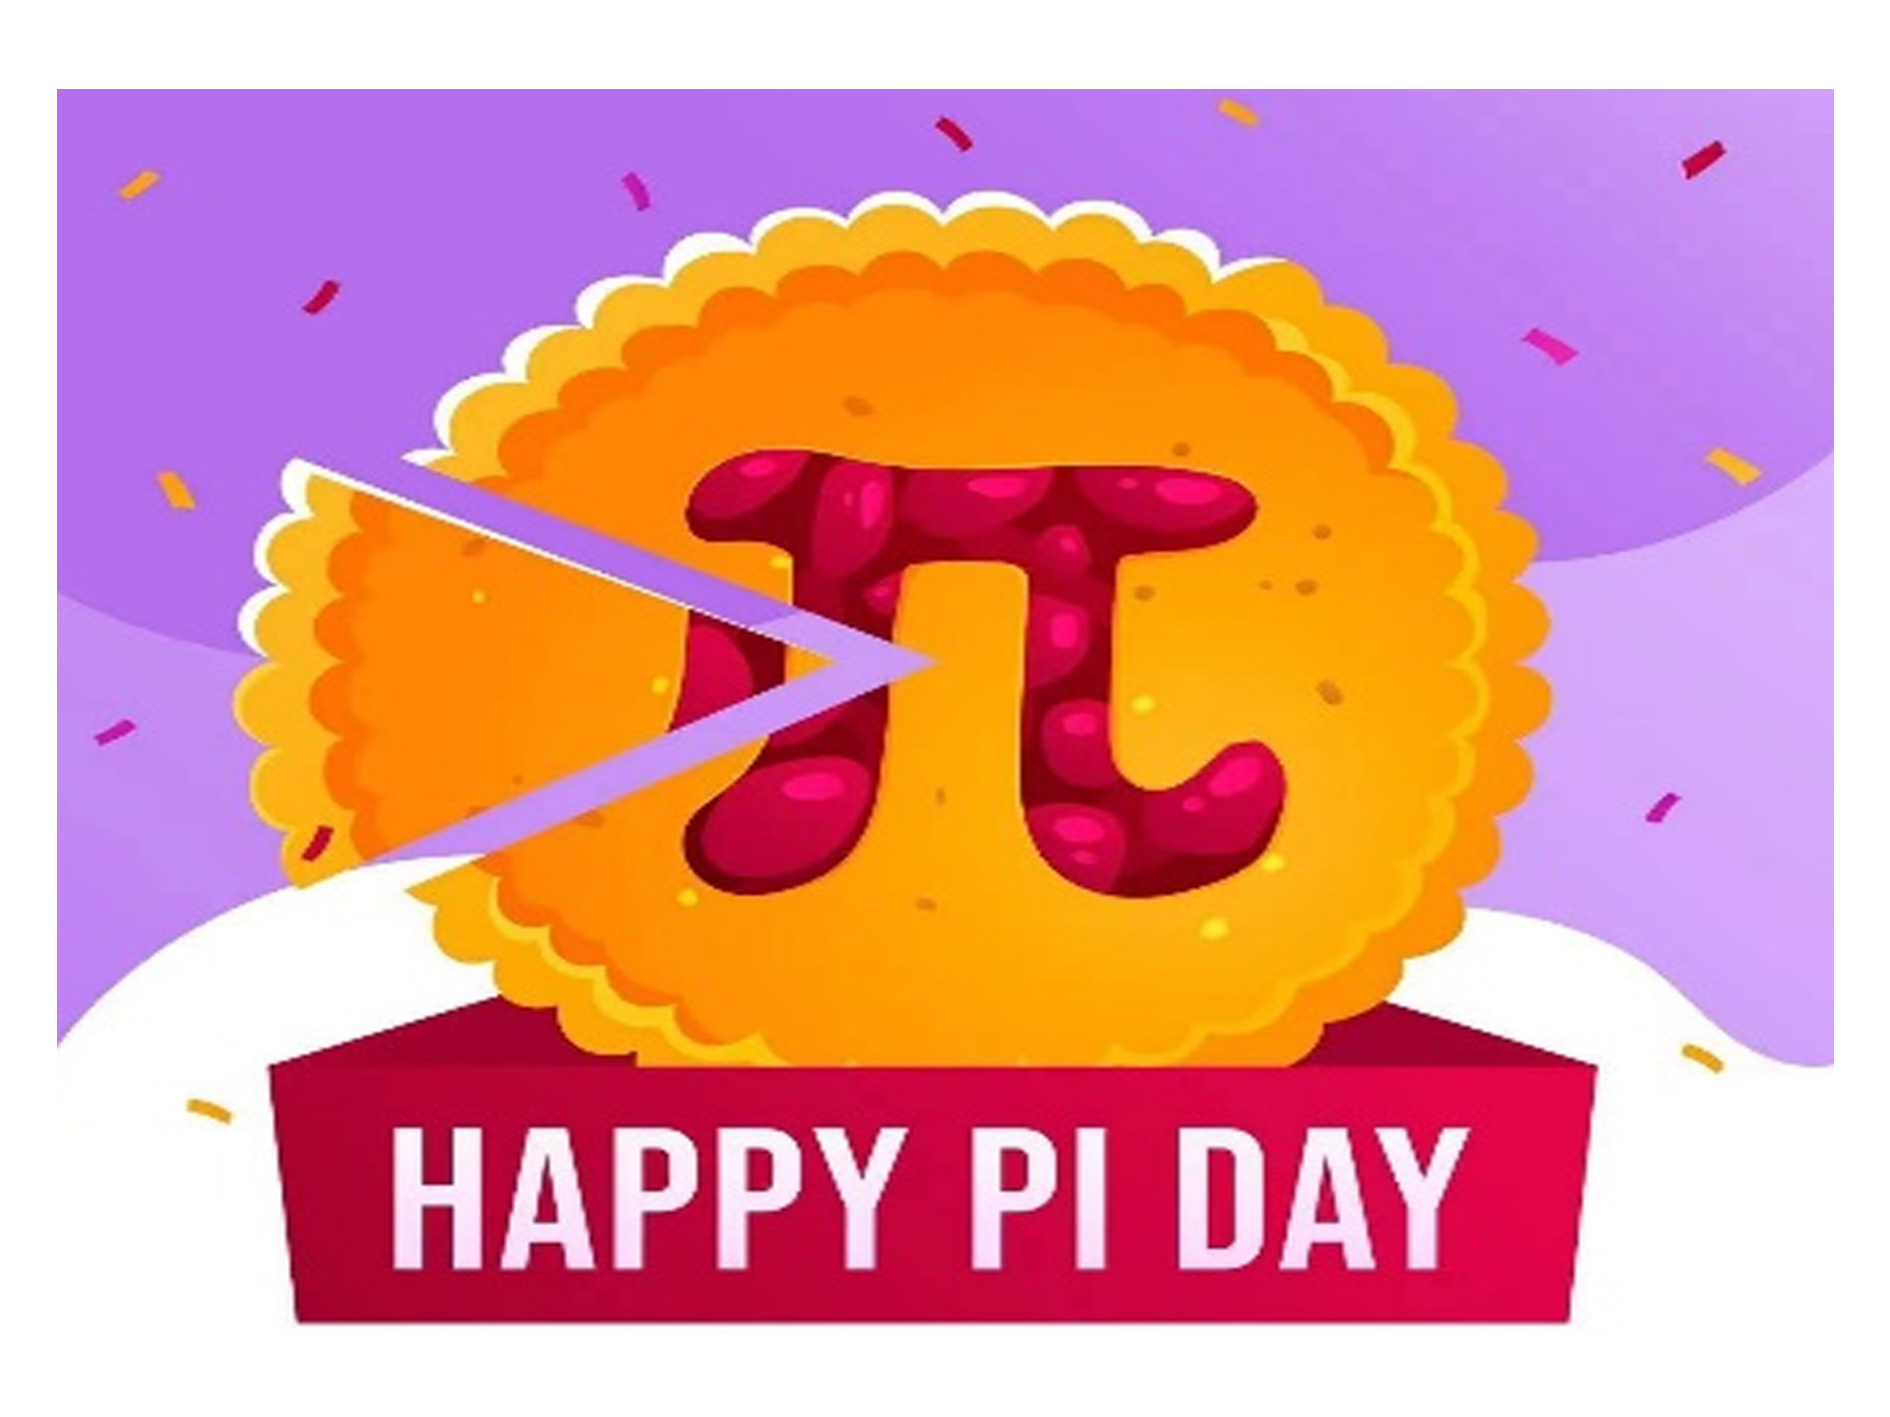 International Pi Day∣π-HuB, a marvelous journey to the intersection of "π" and life sciences